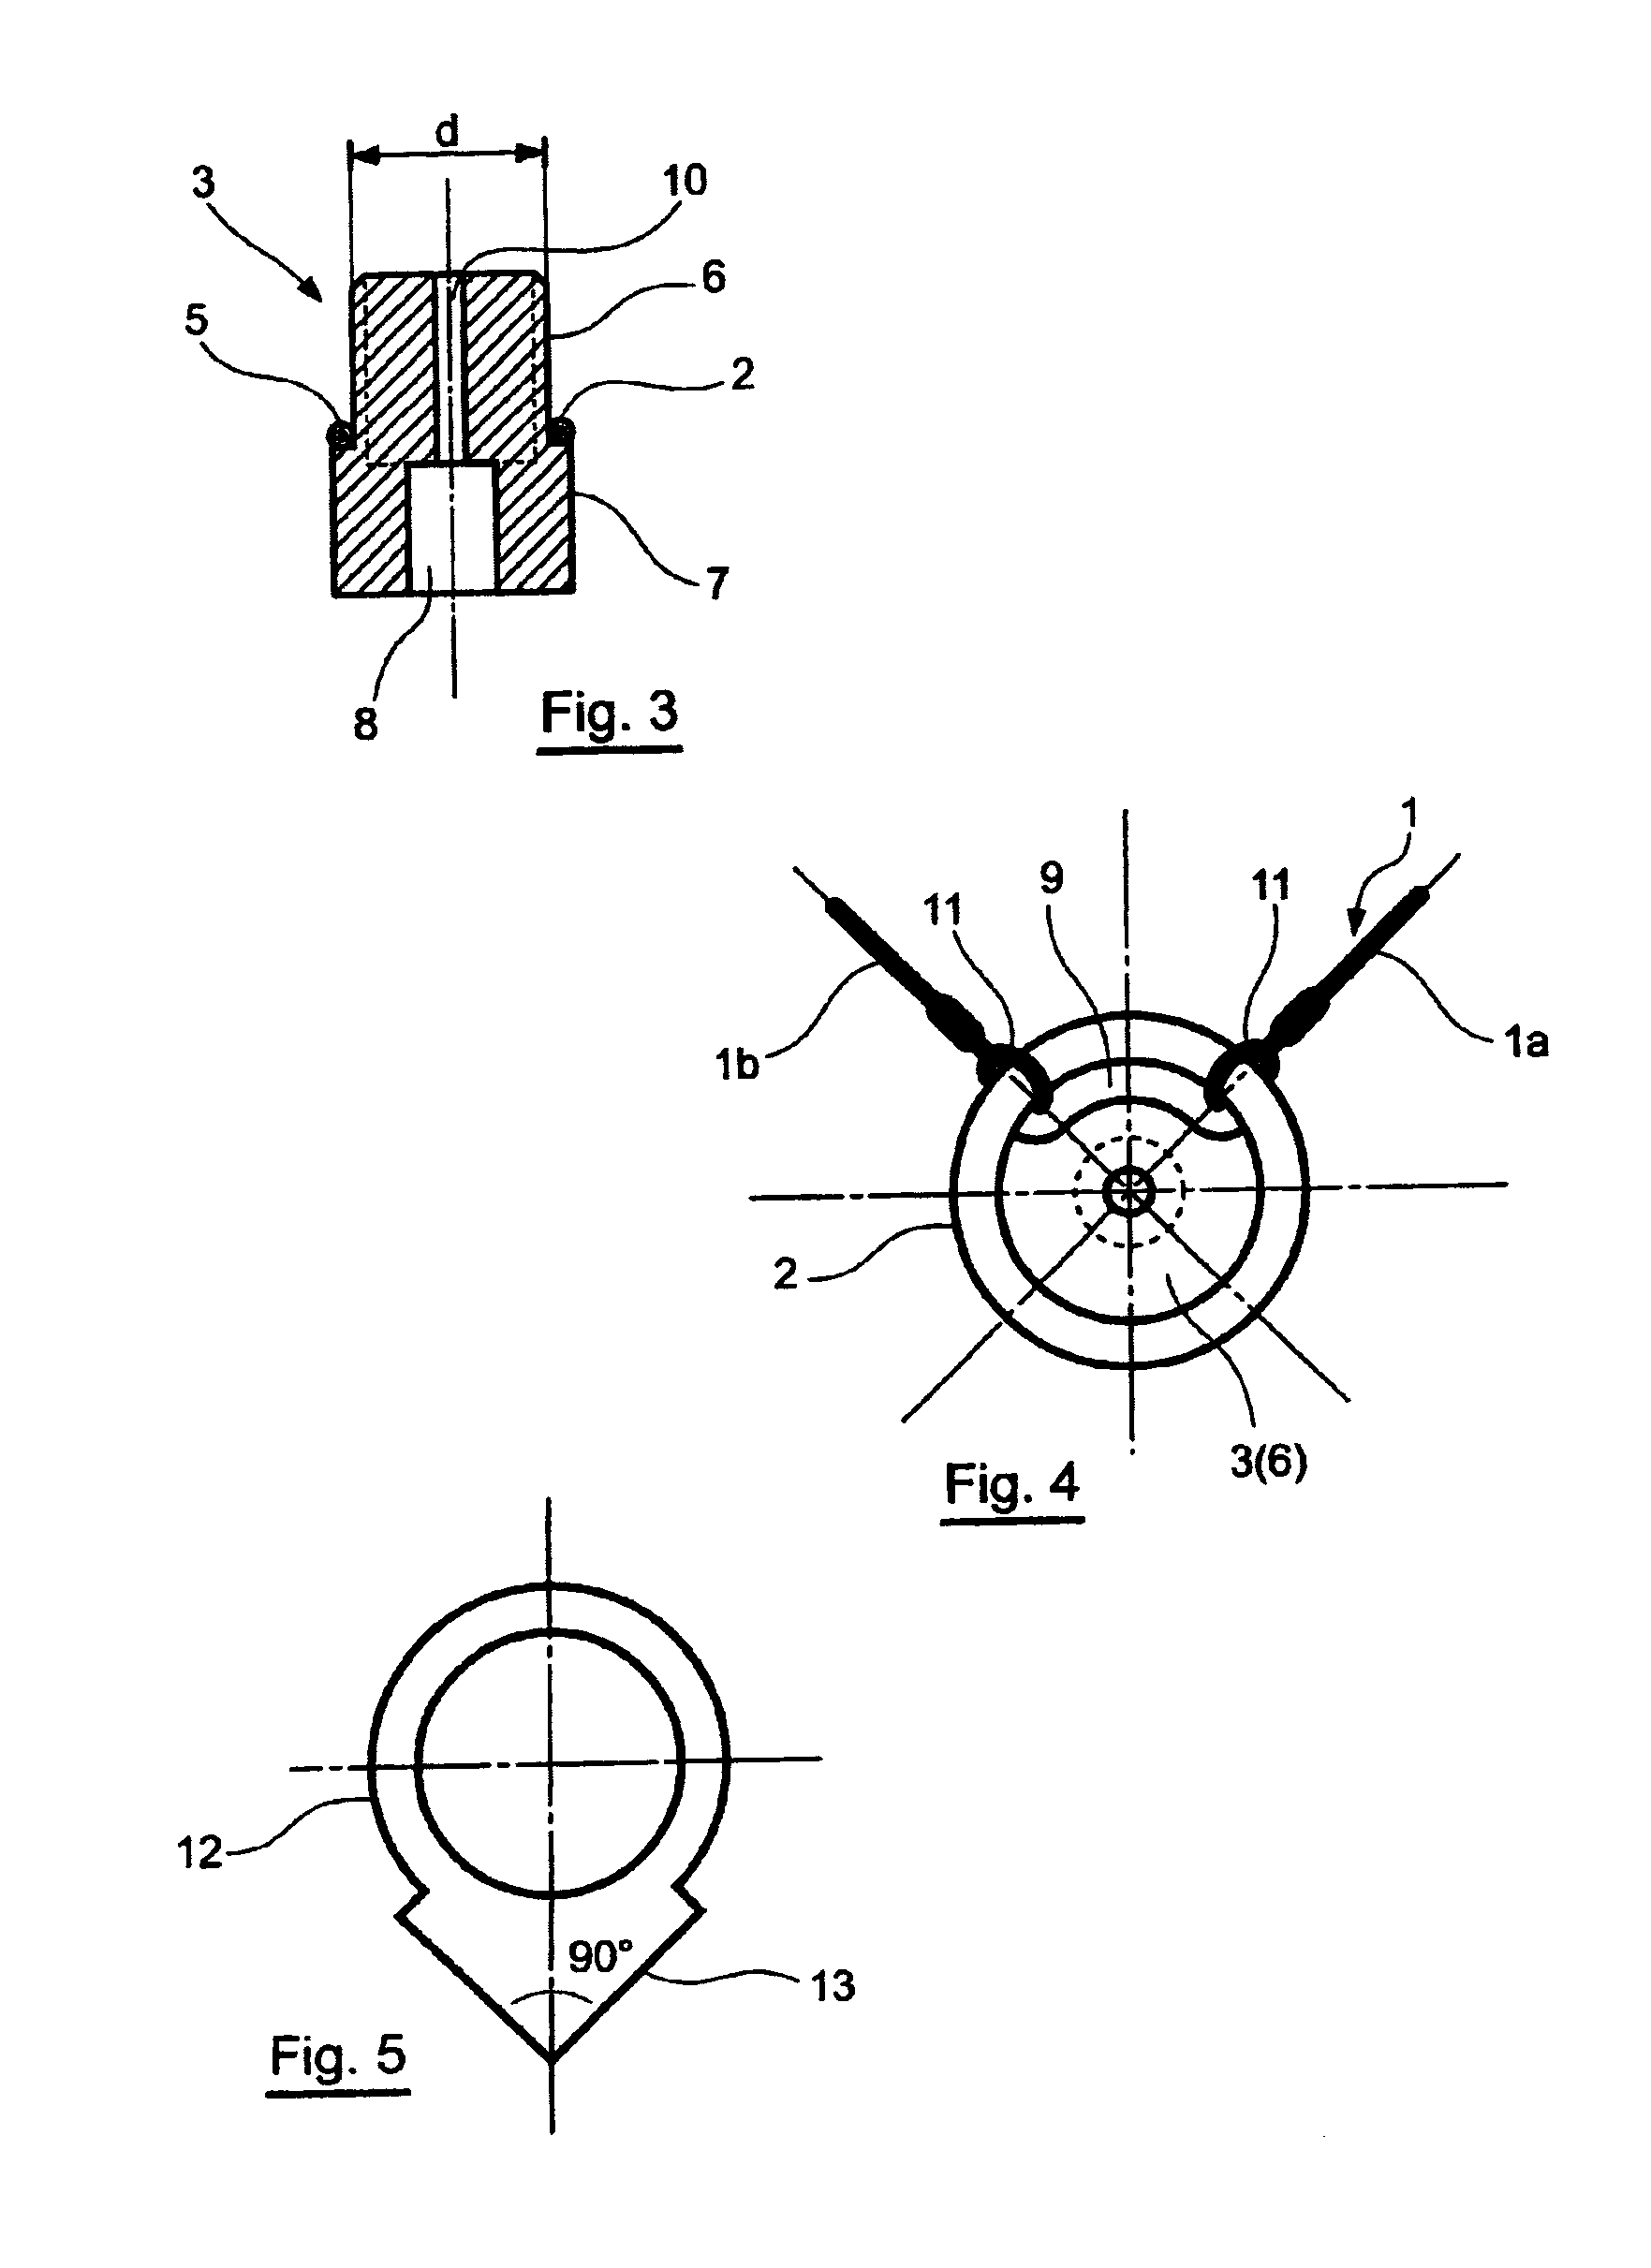 Right angle measuring device